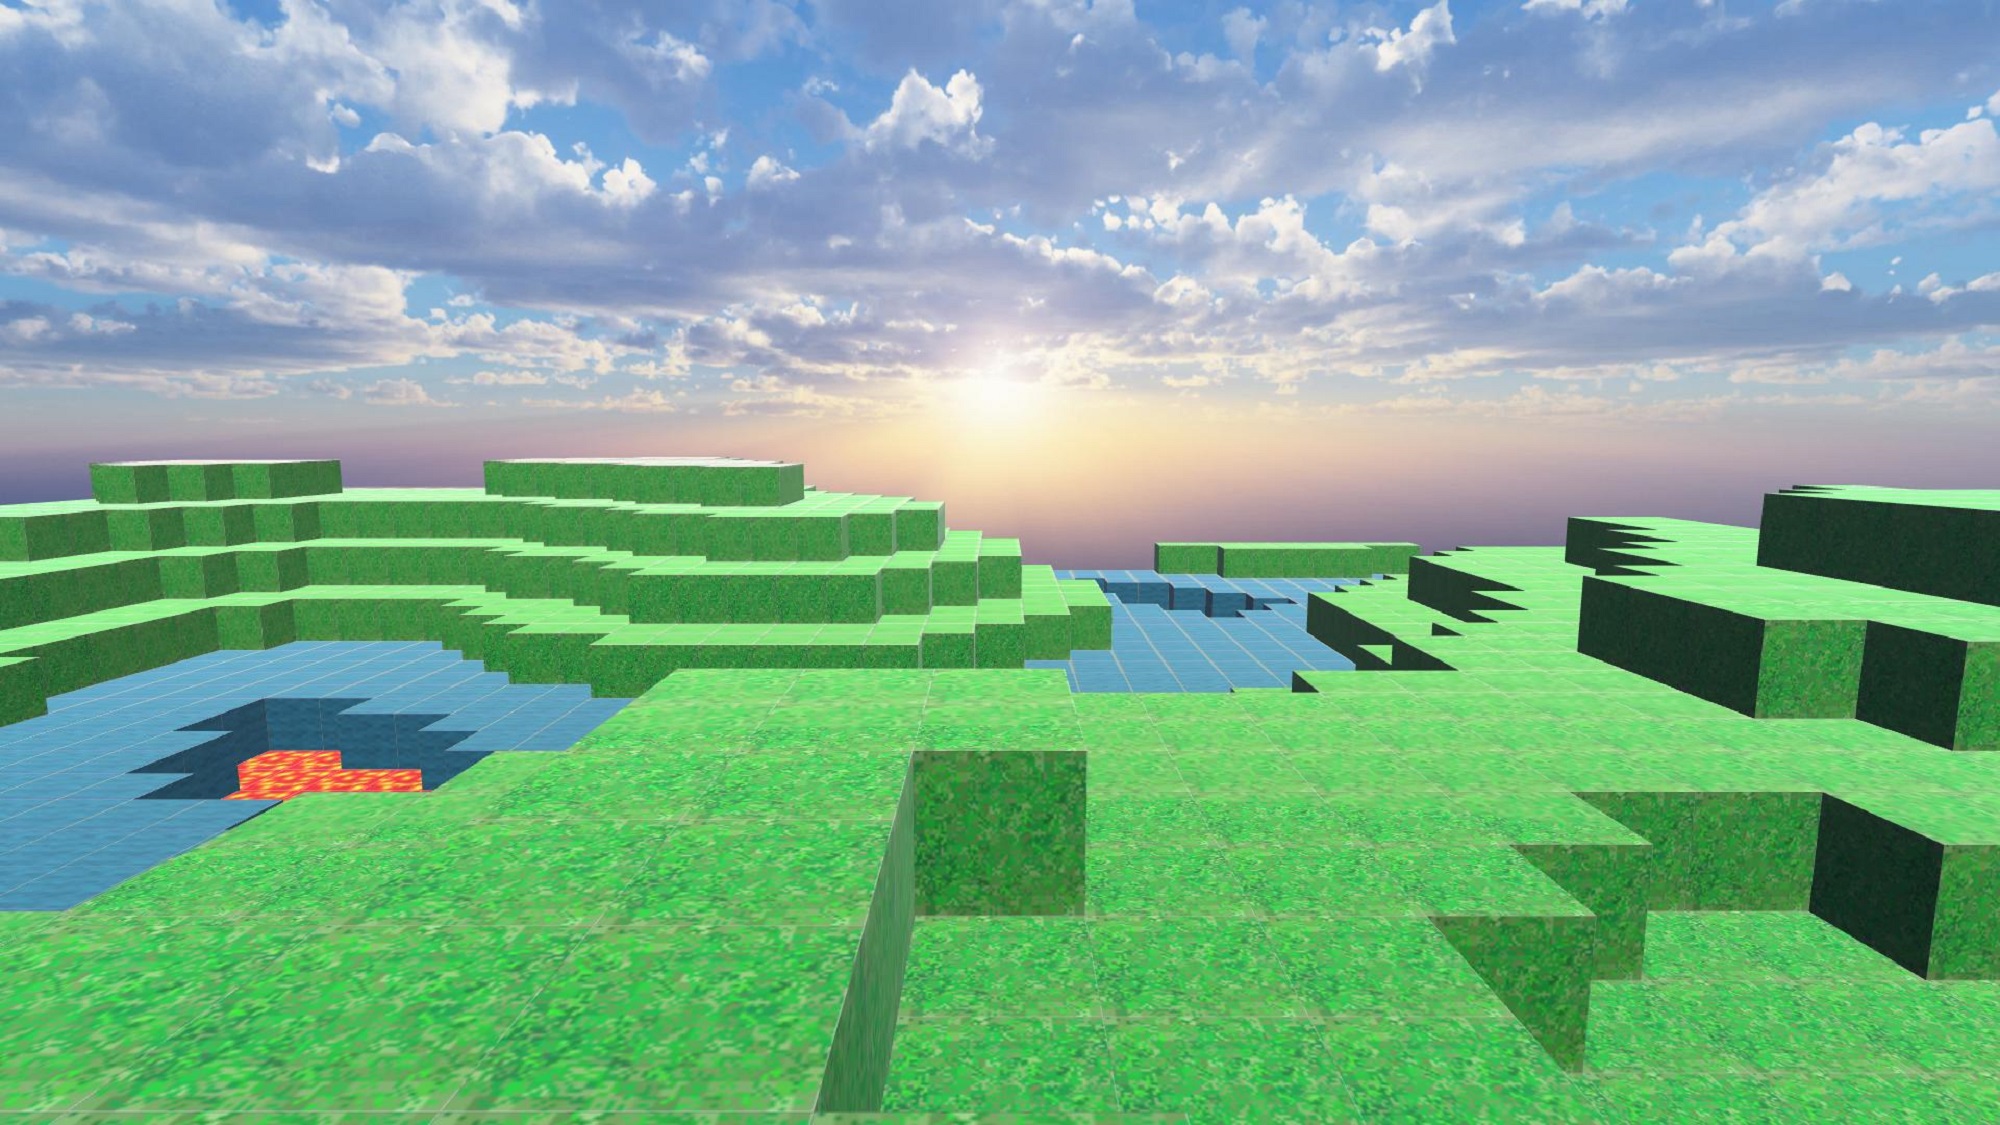 Creating a Minecraft-like landscape and uploading to STYLY -Part 1 of 2-